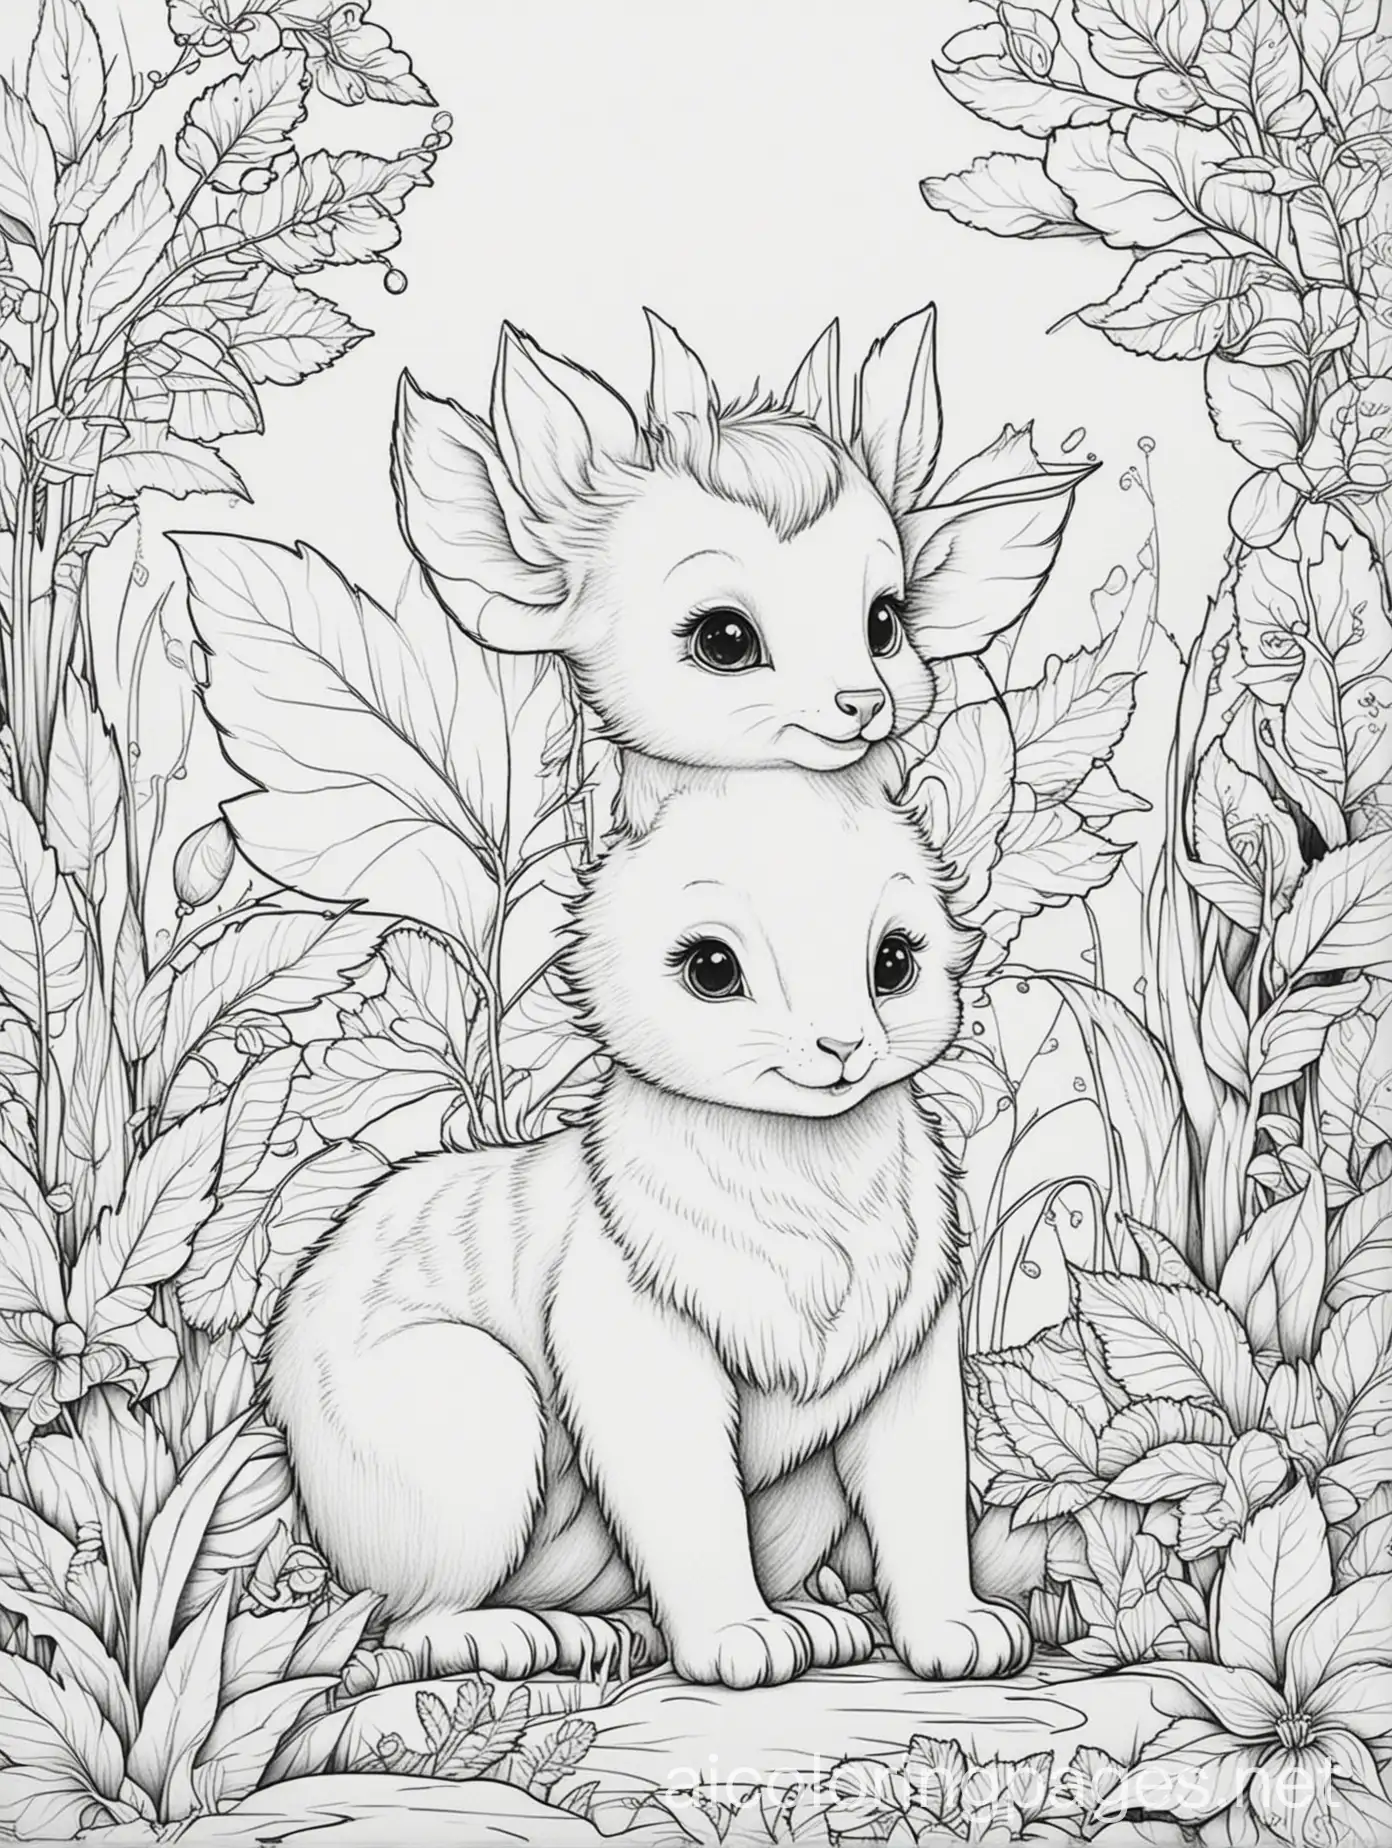 Adorable-Fairytale-Baby-Animals-Coloring-Page-Simplistic-Black-and-White-Line-Art-on-White-Background